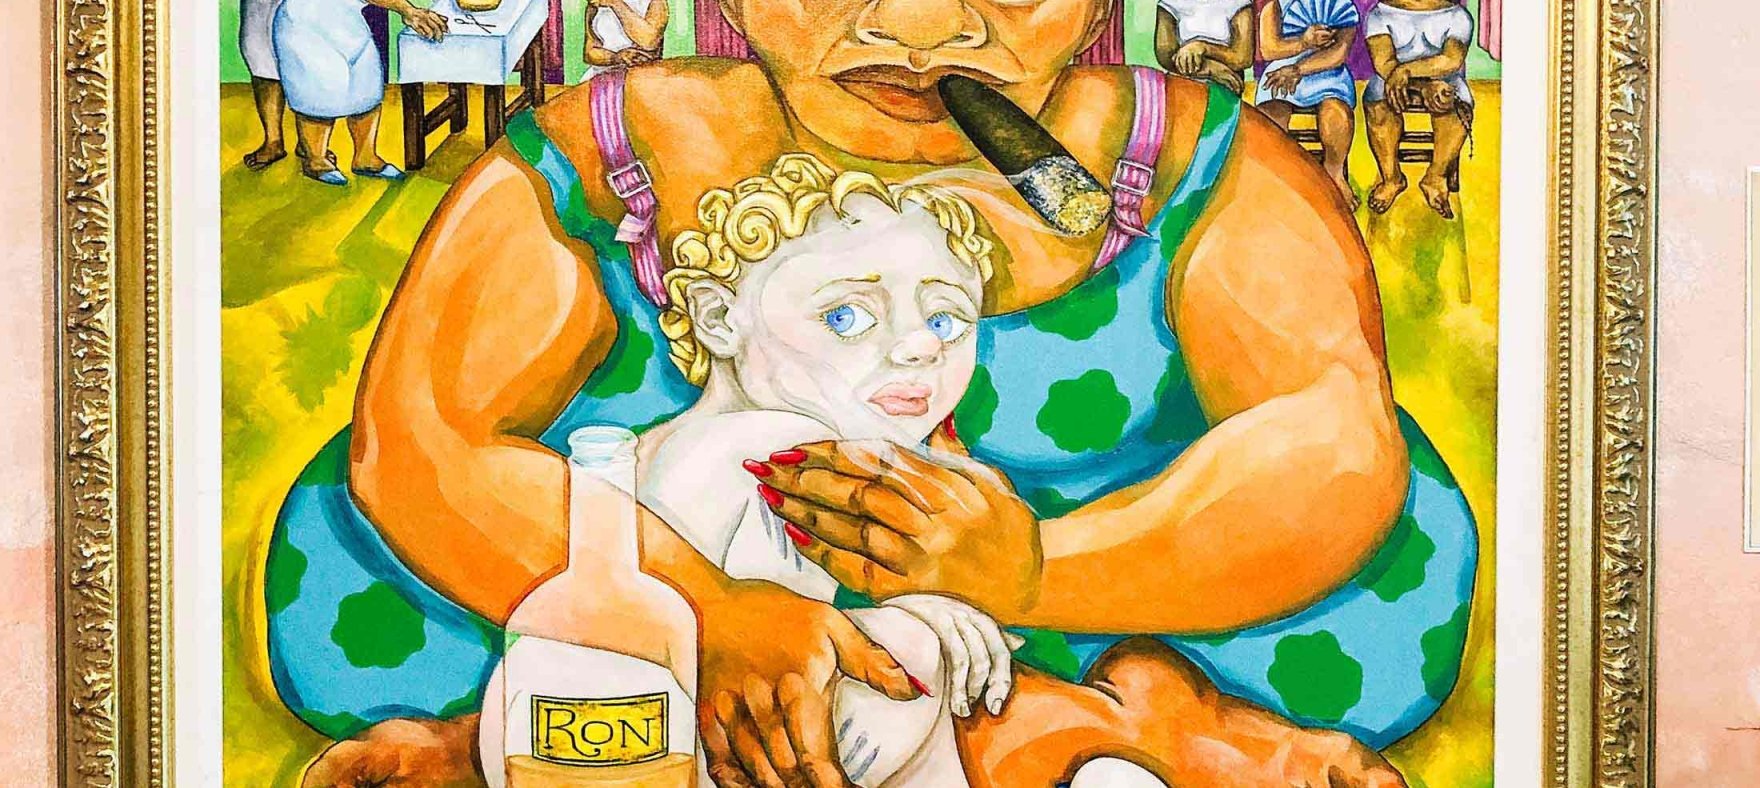 A close focus on the art of a woman smoking a cigar as she holds a fearful child in her arms next to a rum bottle and glass